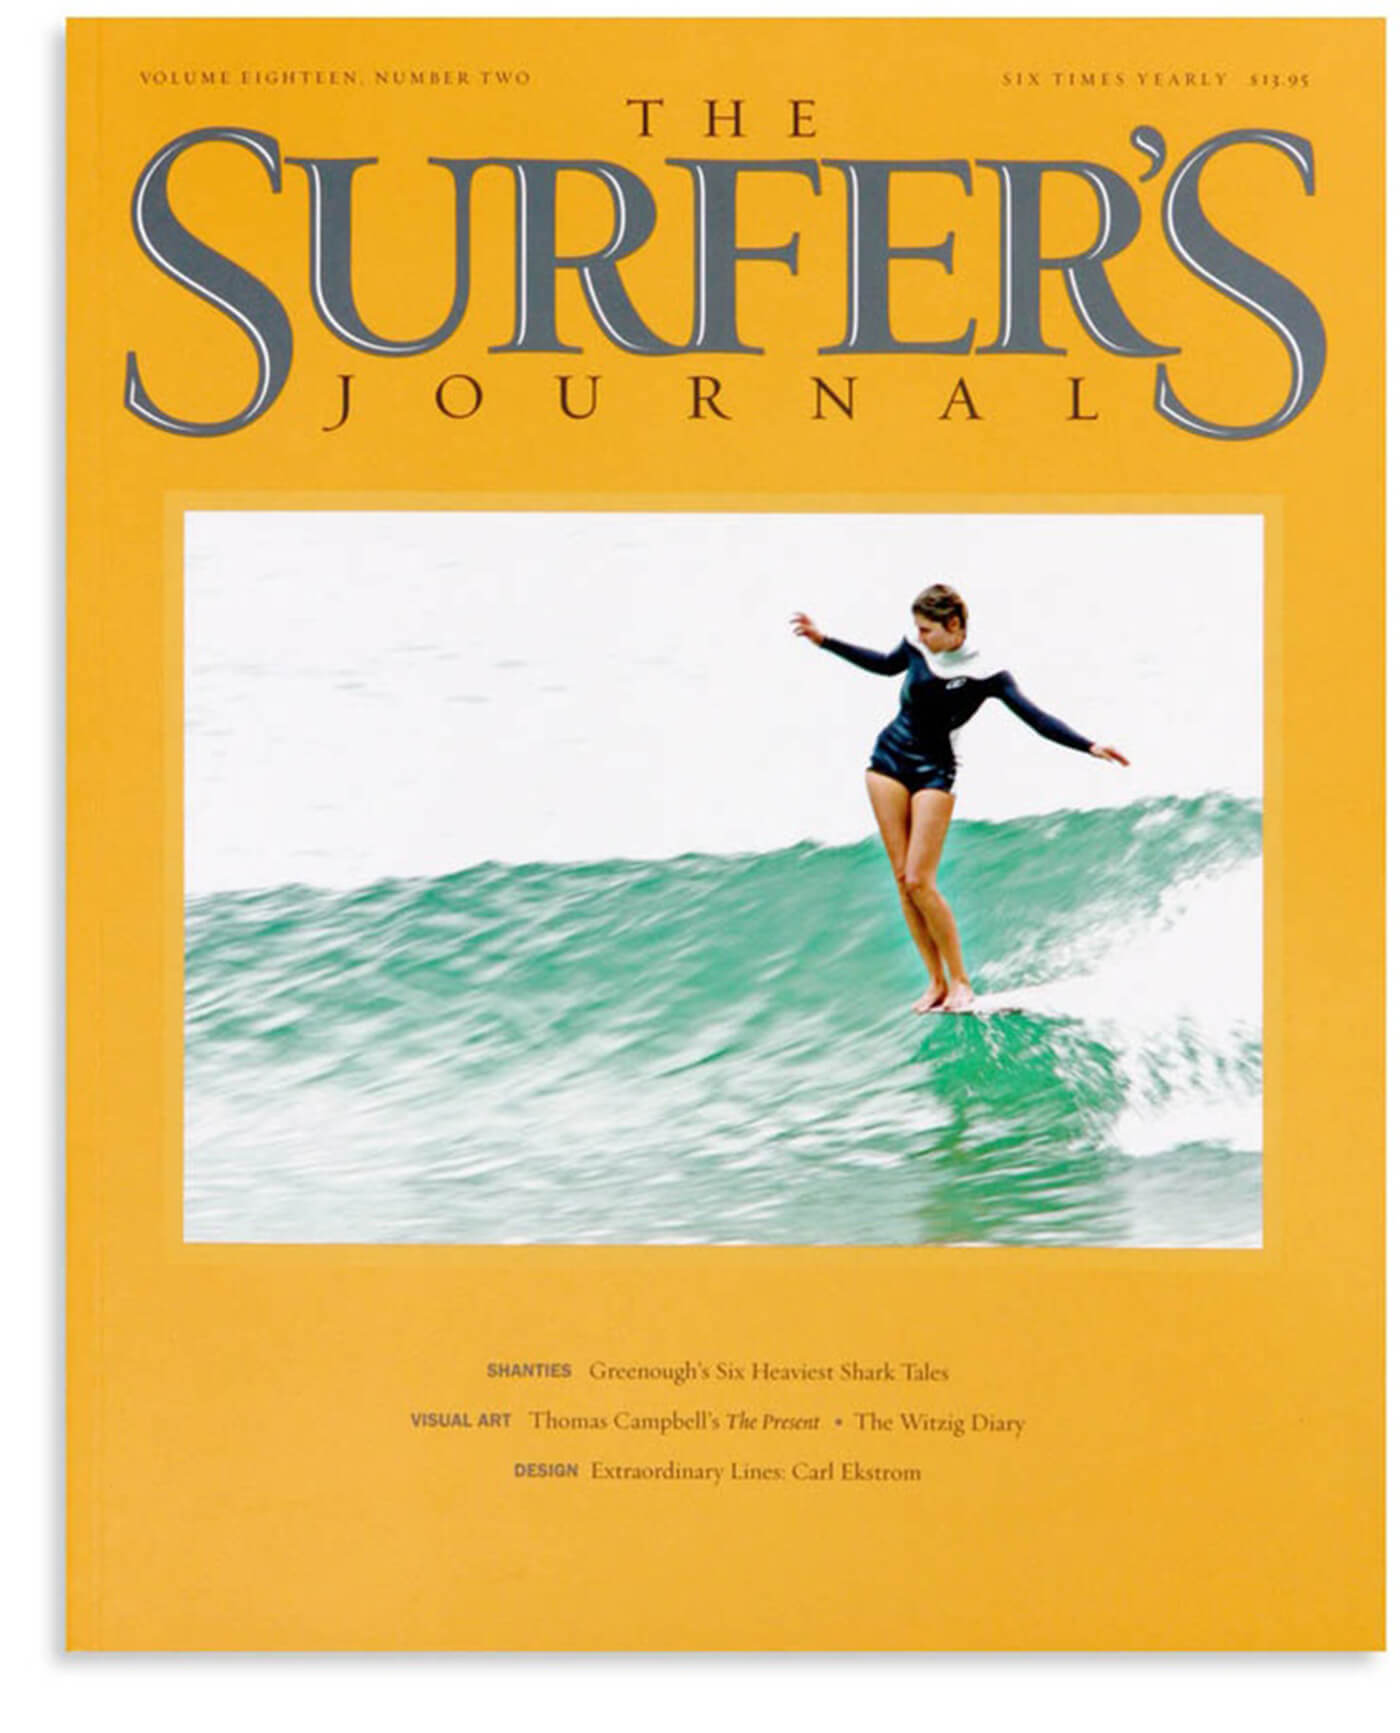 Photo of the first ever woman on the cover of the Surfer's Journal magazine